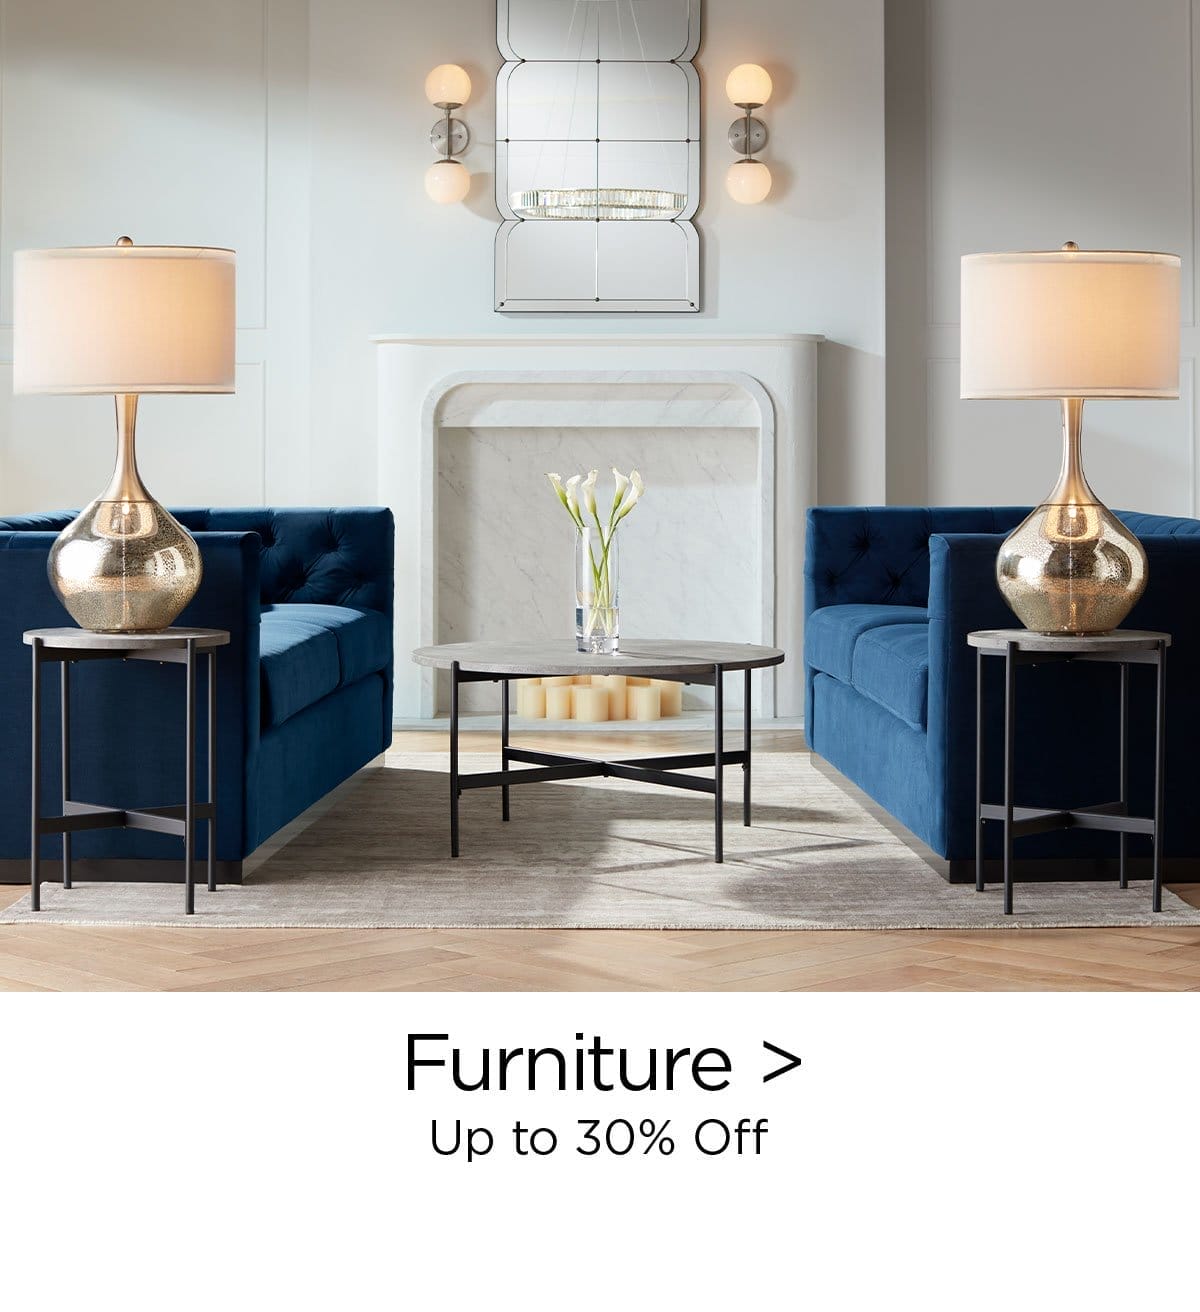 Furniture > Up to 30% Off